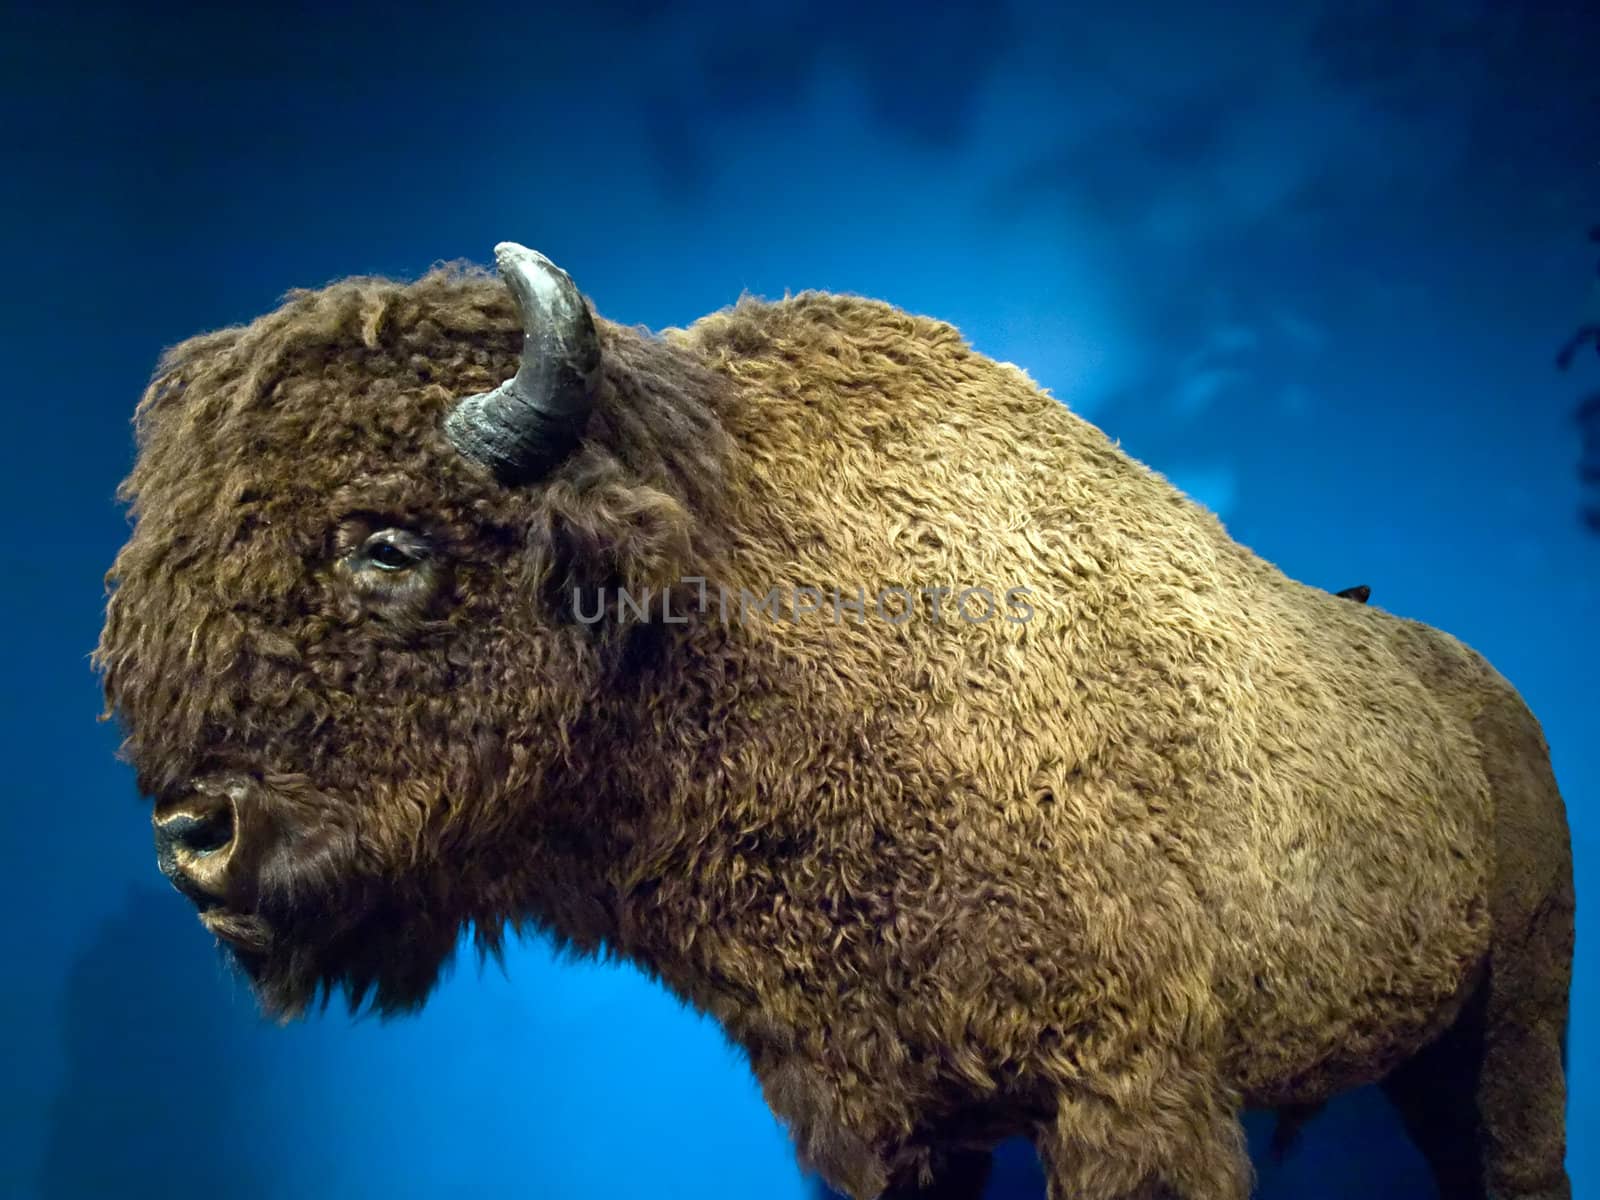 Buffalo on display at a museum.